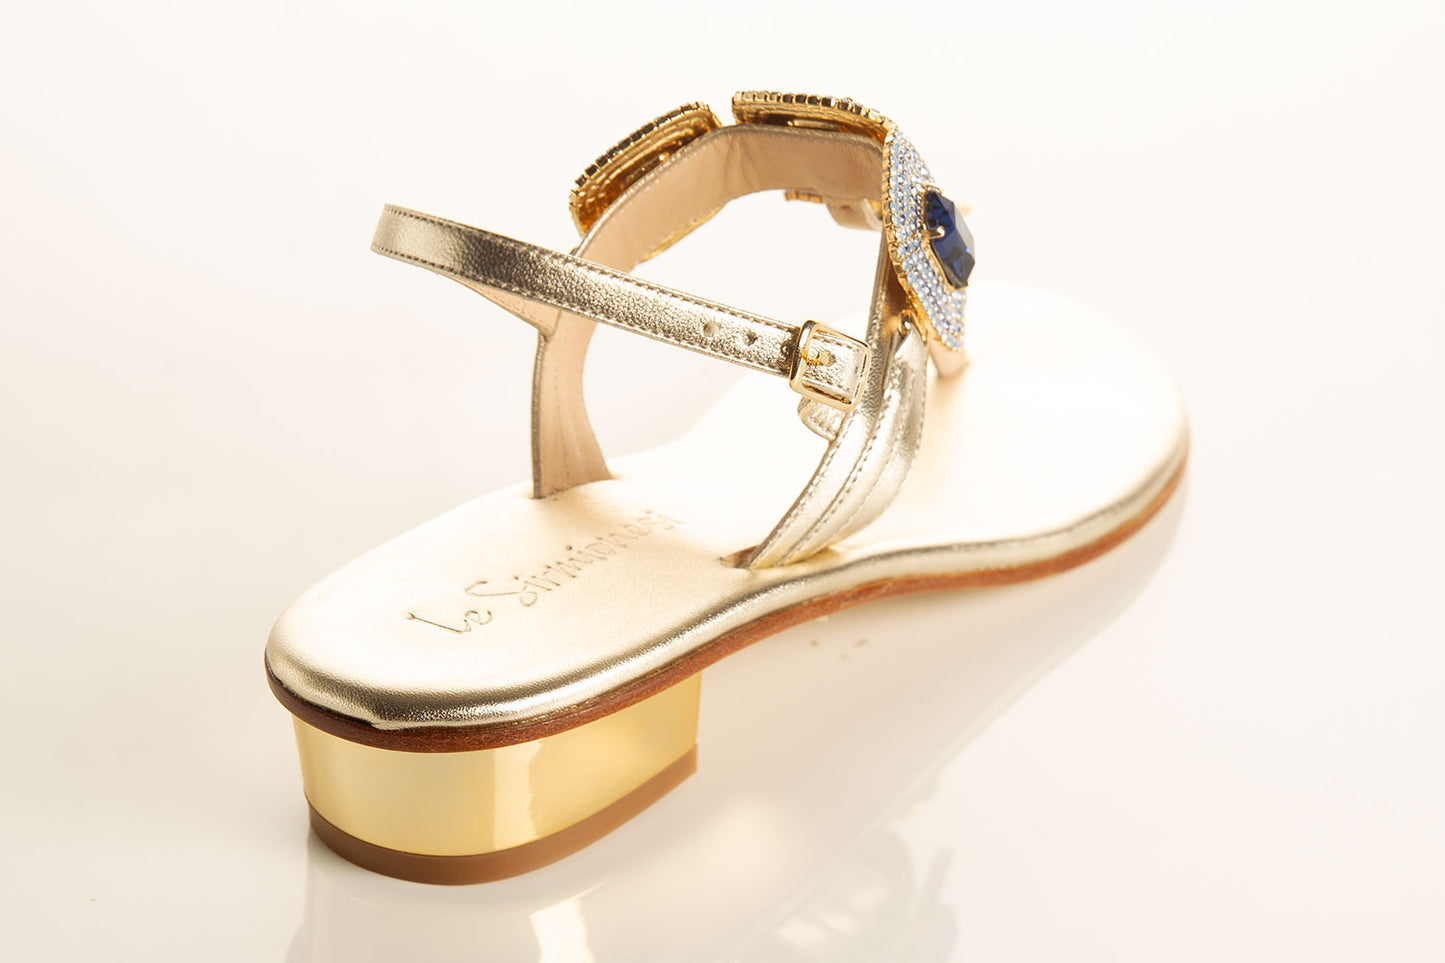 blue sandals with gold base, jewel sandals with swarovski stones, comfortable heel sandals, high-quality sandals, elegant footwear collection